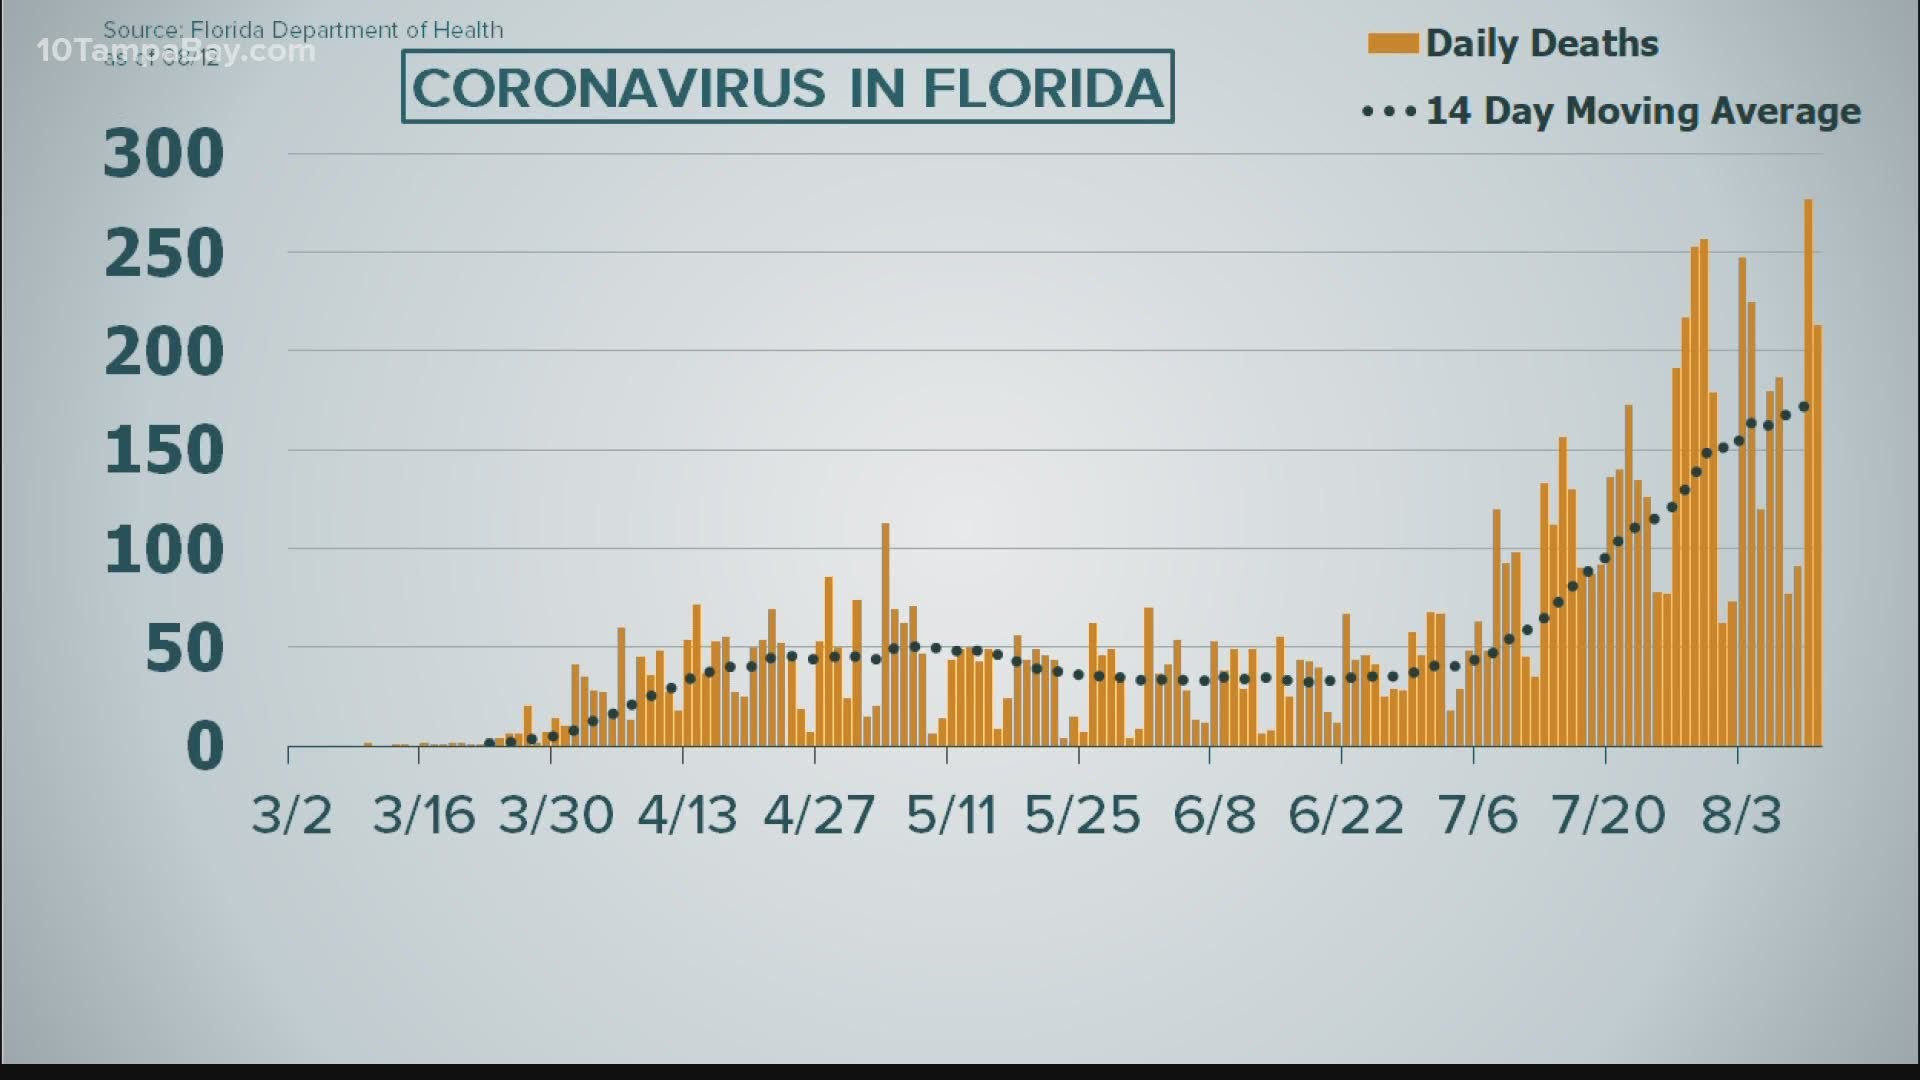 It's the second day in a row the state reported more than 200 new deaths from coronavirus.